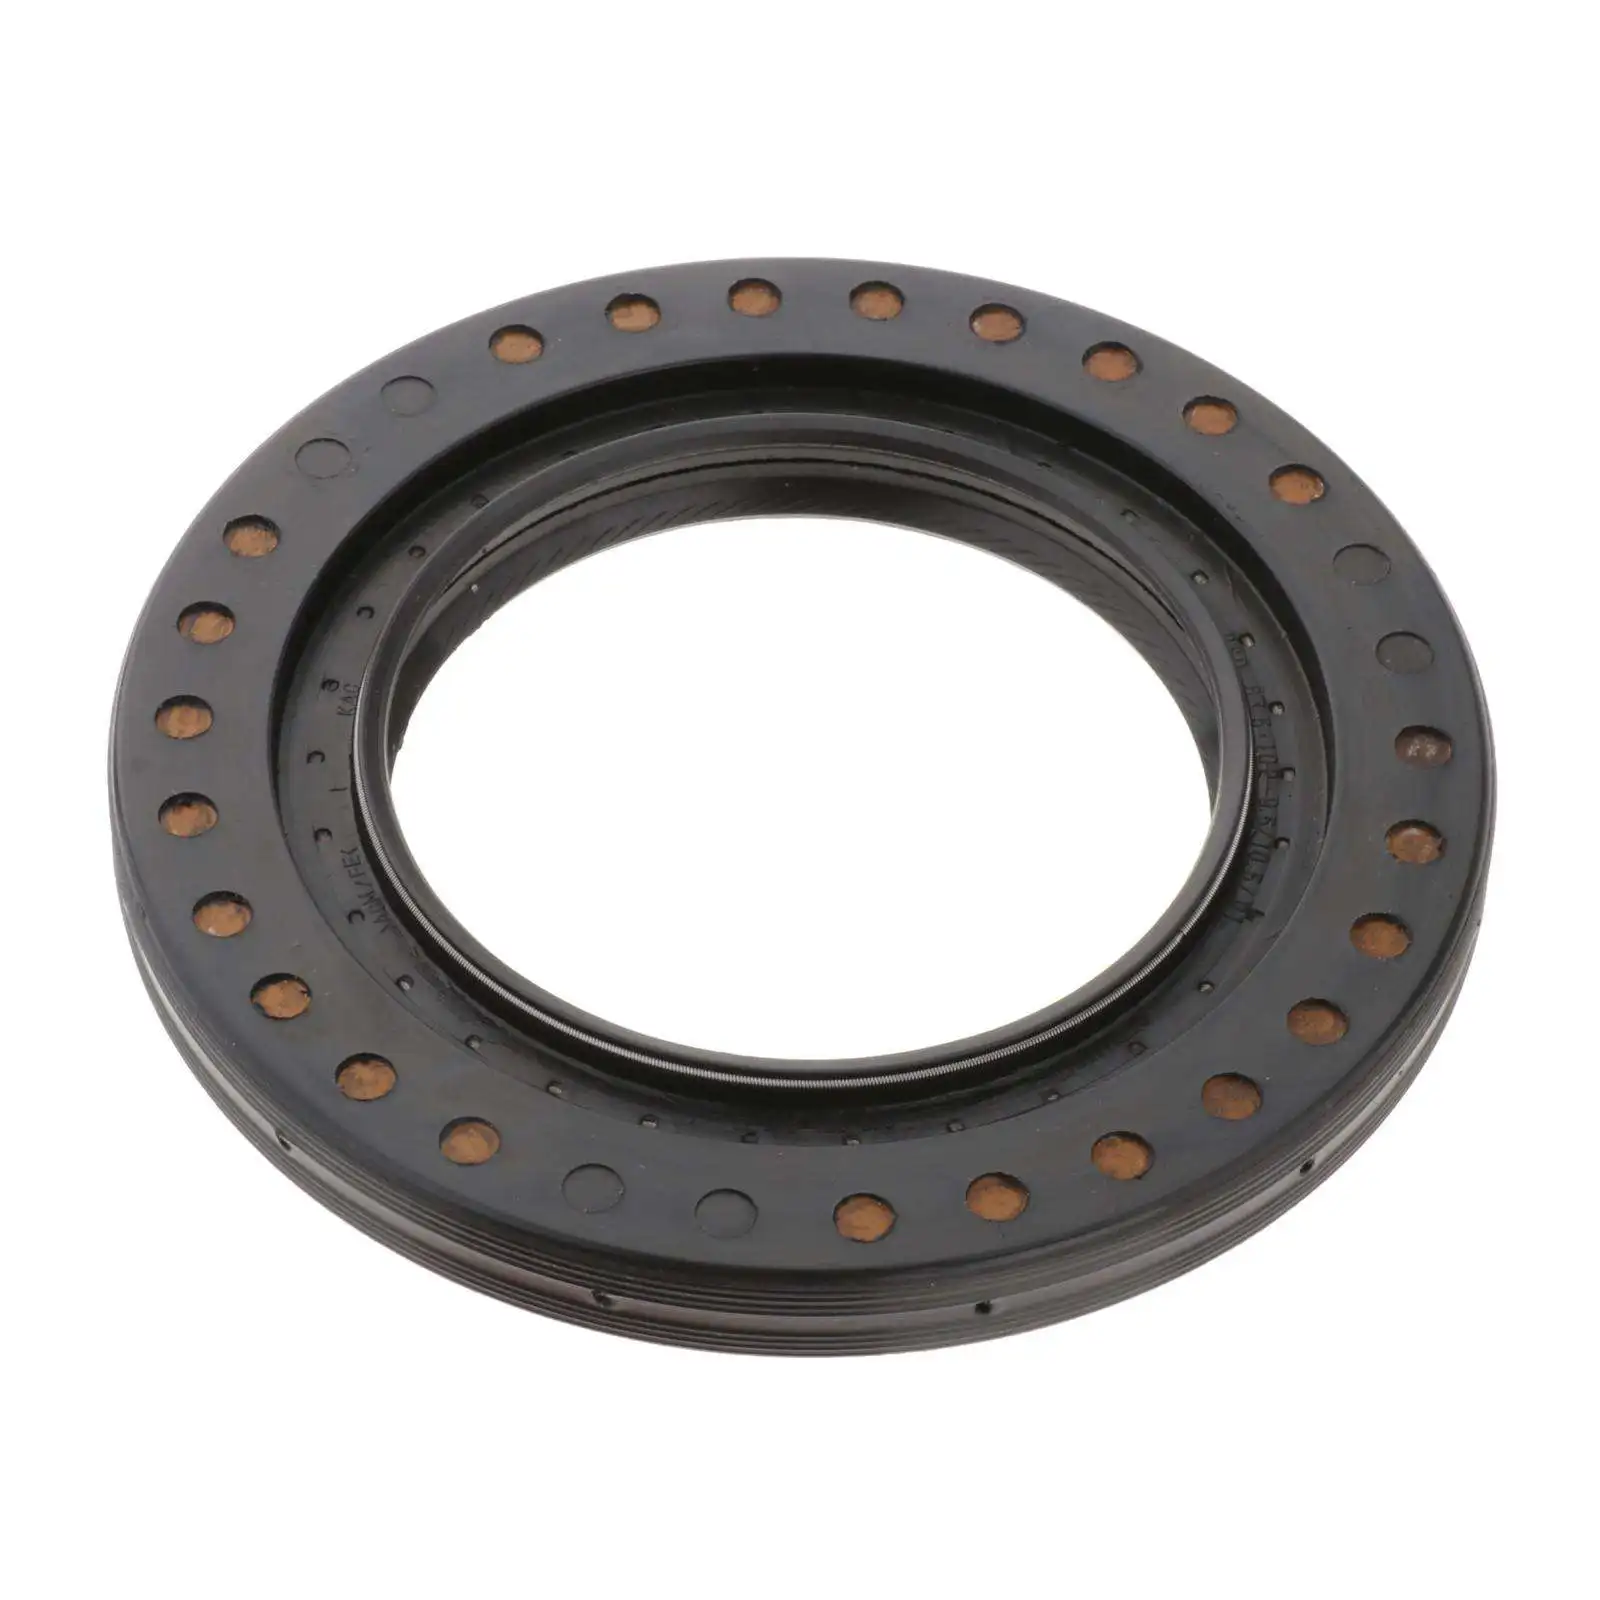 Half Shaft Oil Seal Drive Shaft Oil Seal for Audi A4 A6 A8 for 01N for 01T Transmission